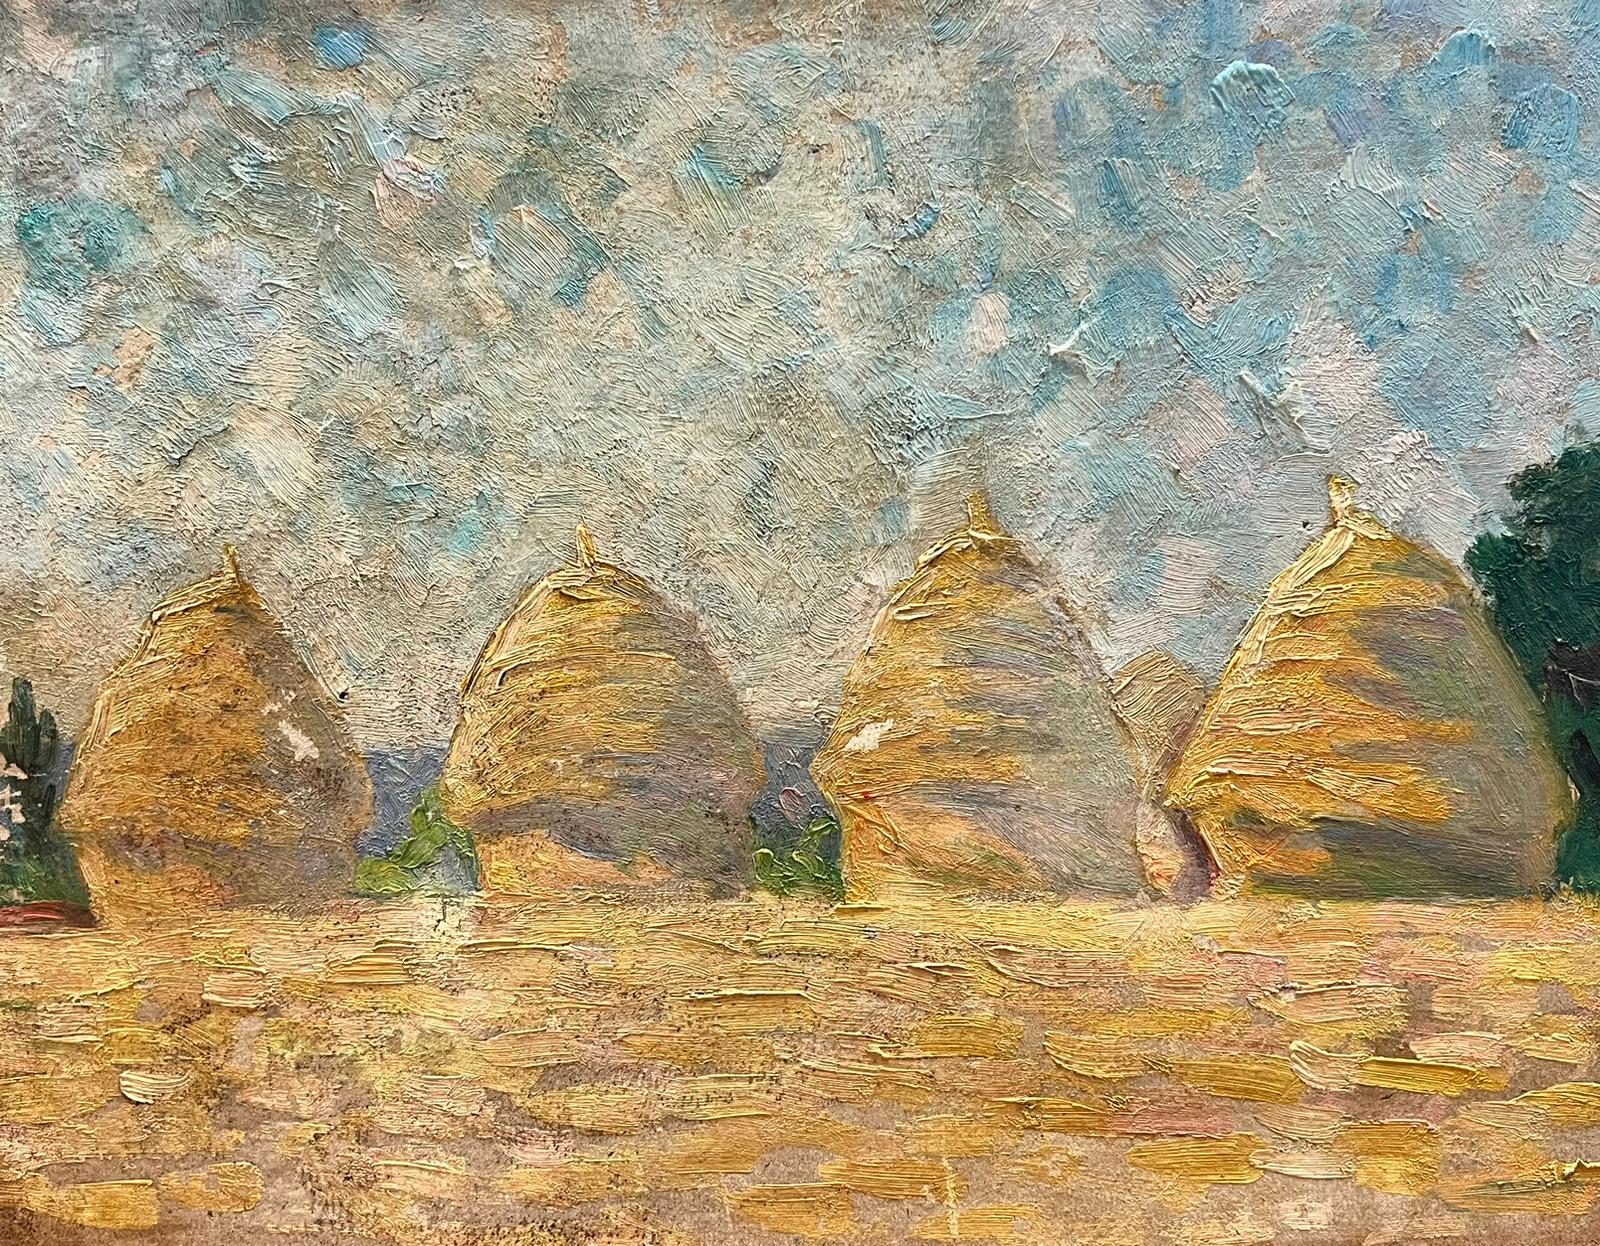 Suzanne Crochet Landscape Painting - 1930's French Post Impressionist Oil Painting Hay Stacks in Golden Fields